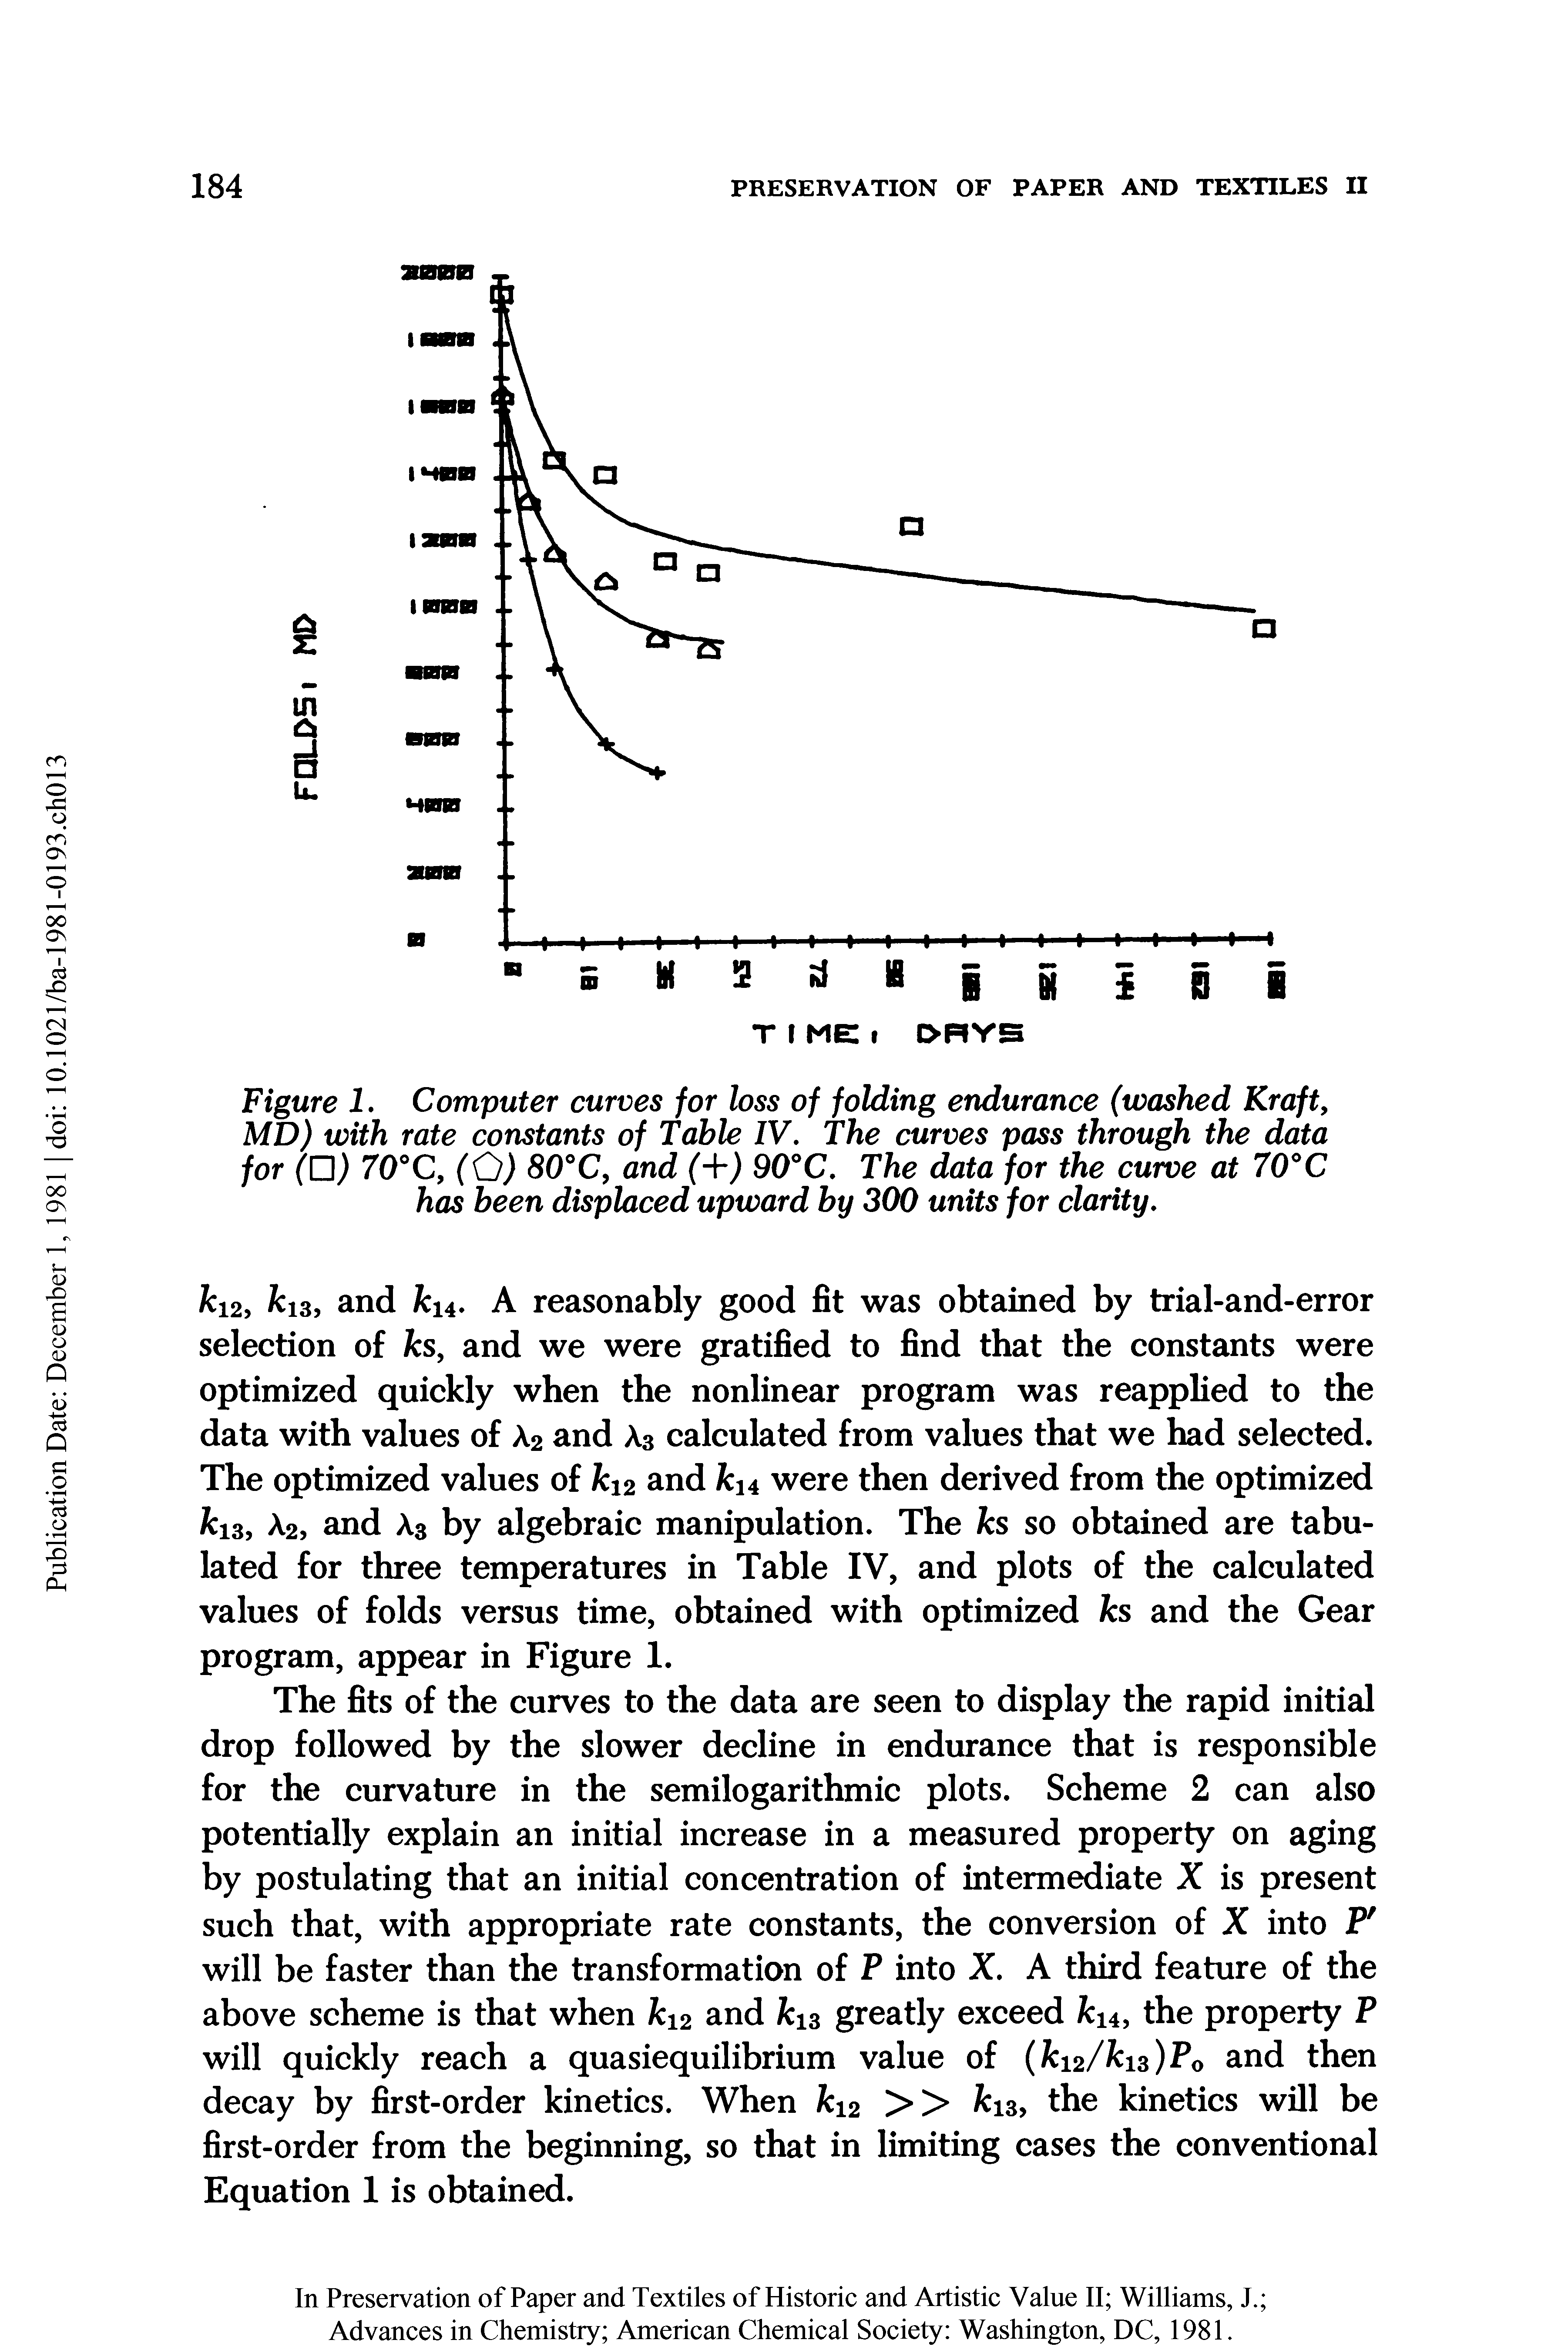 Figure 1. Computer curves for loss of folding endurance (washed Kraft, MD) with rate constants of Table IV. The curves pass through the data for (D) 70°C, (O) 80°C, and (+) 90°C. The data for the curve at 70°C has been displaced upward by 300 units for clarity.